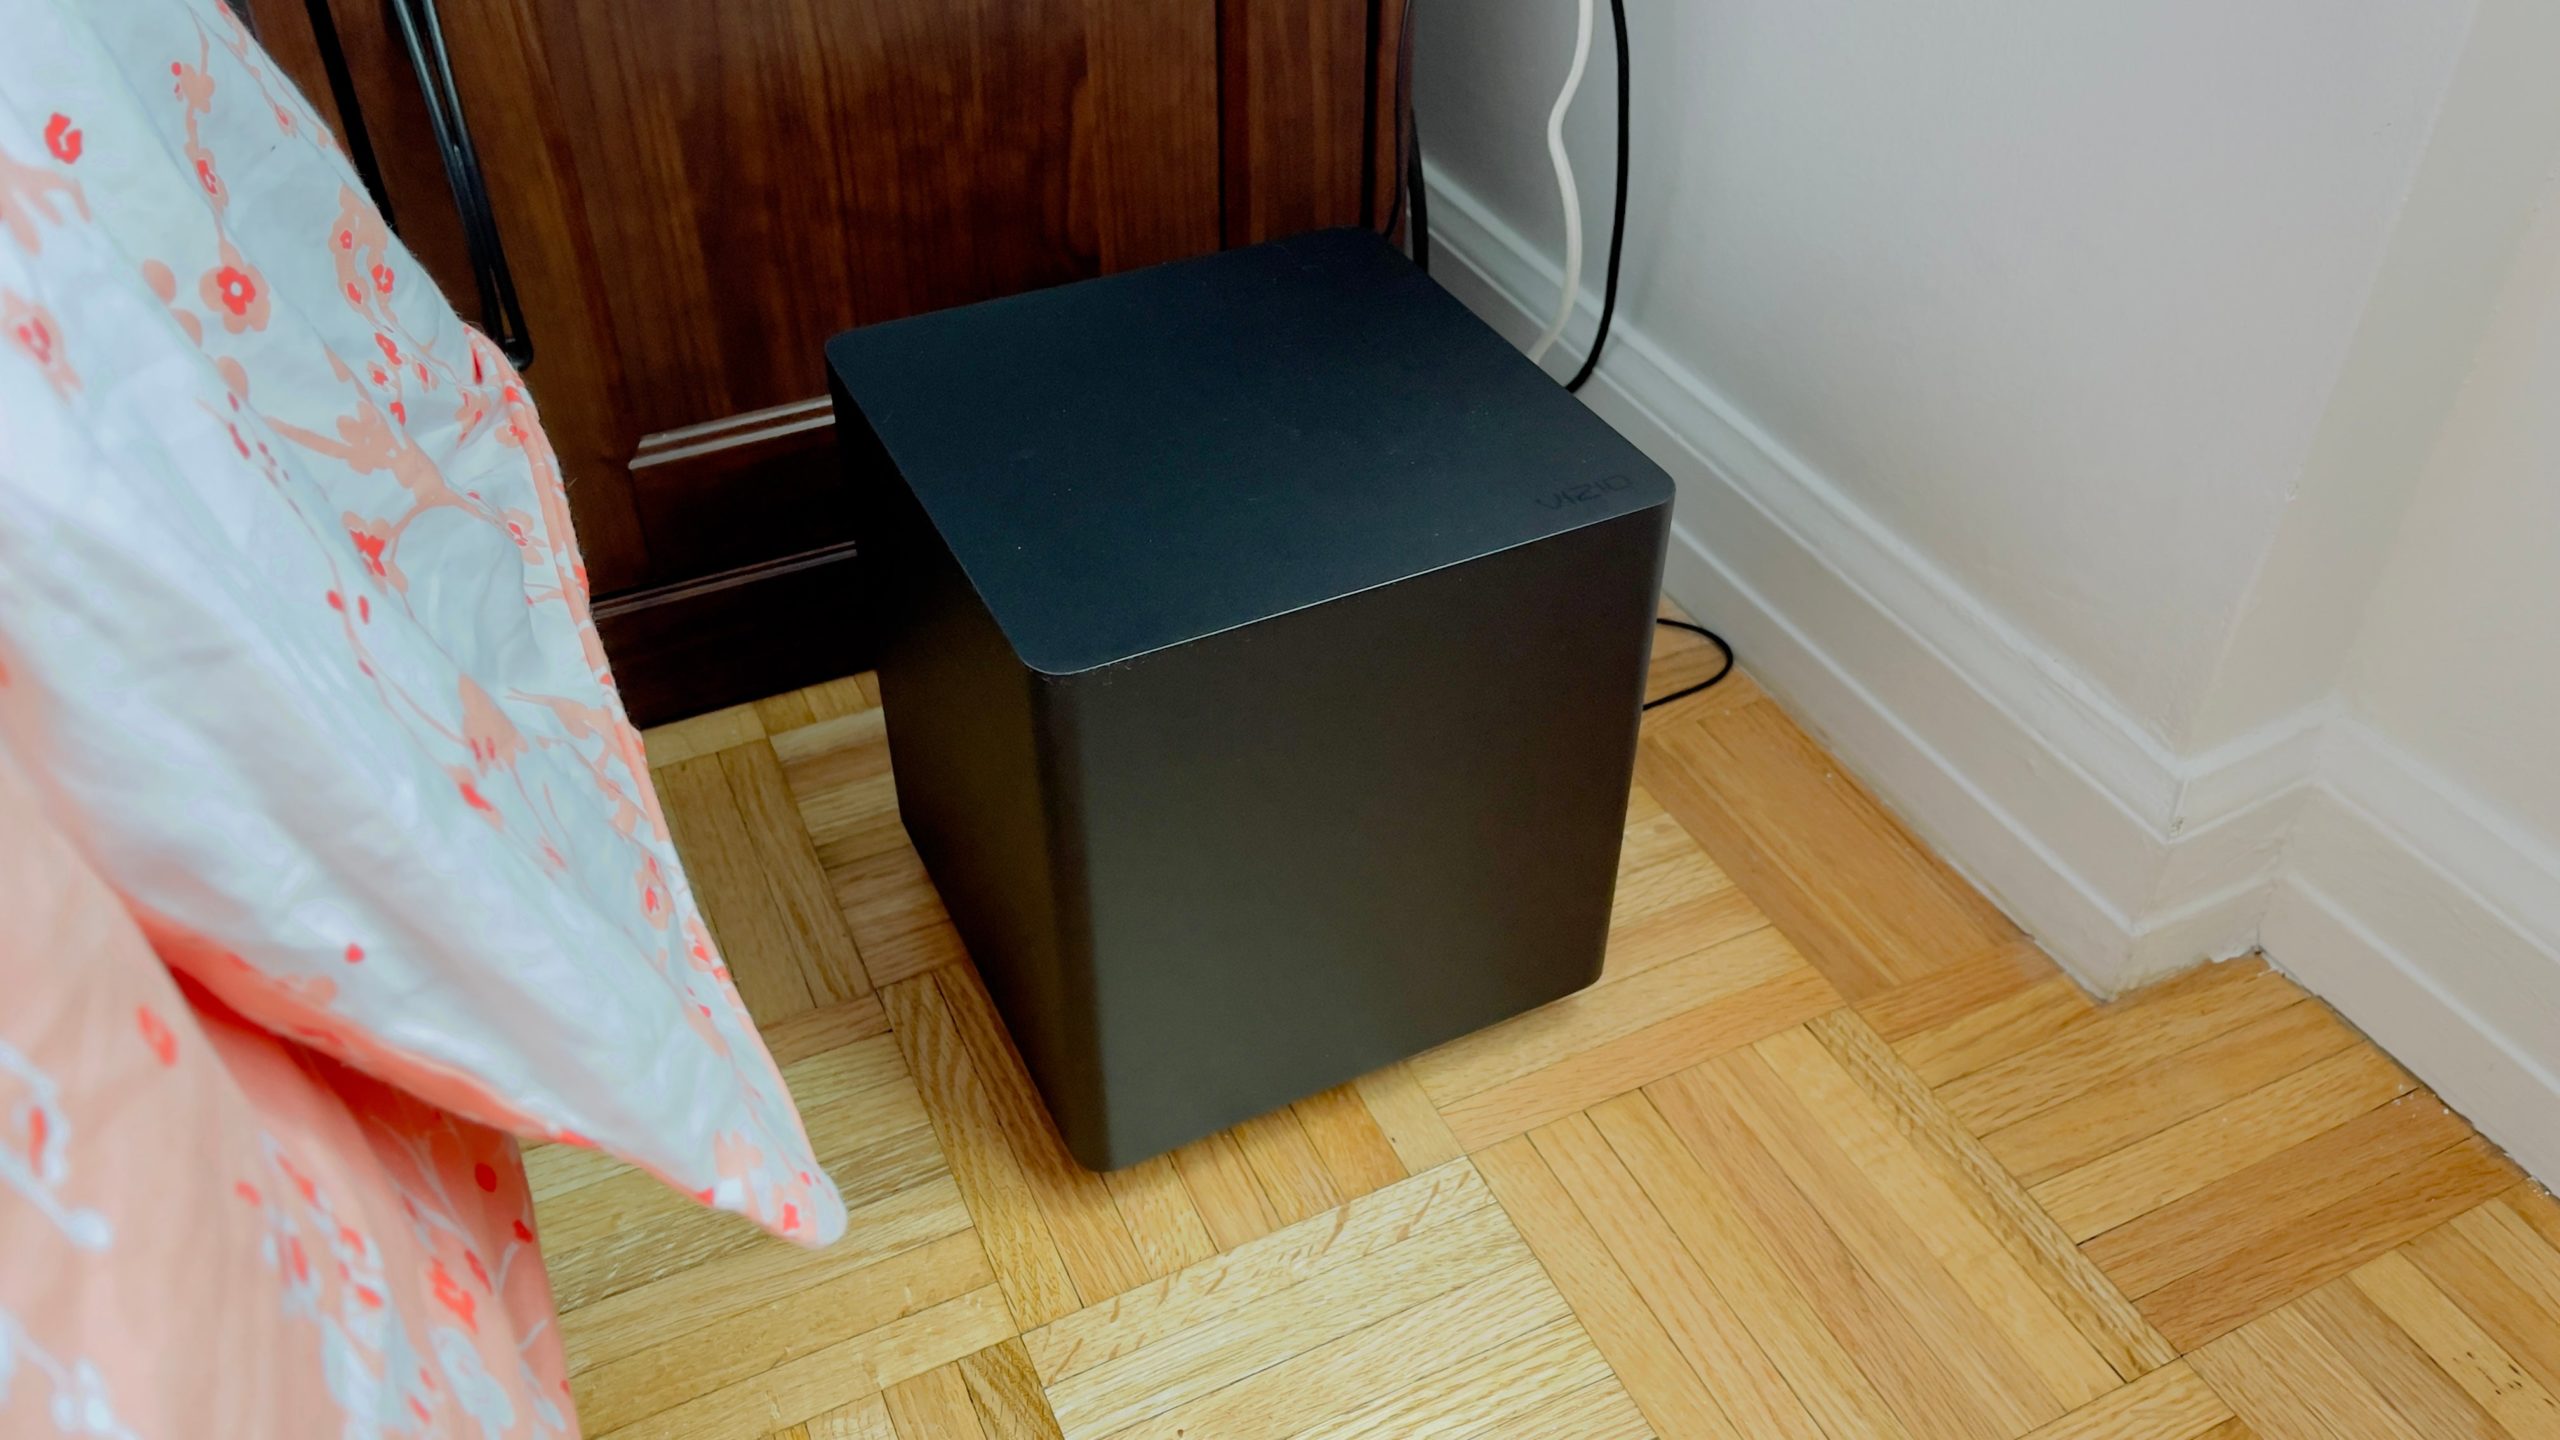 The subwoofer is small and compact. (Photo: Victoria Song/Gizmodo)